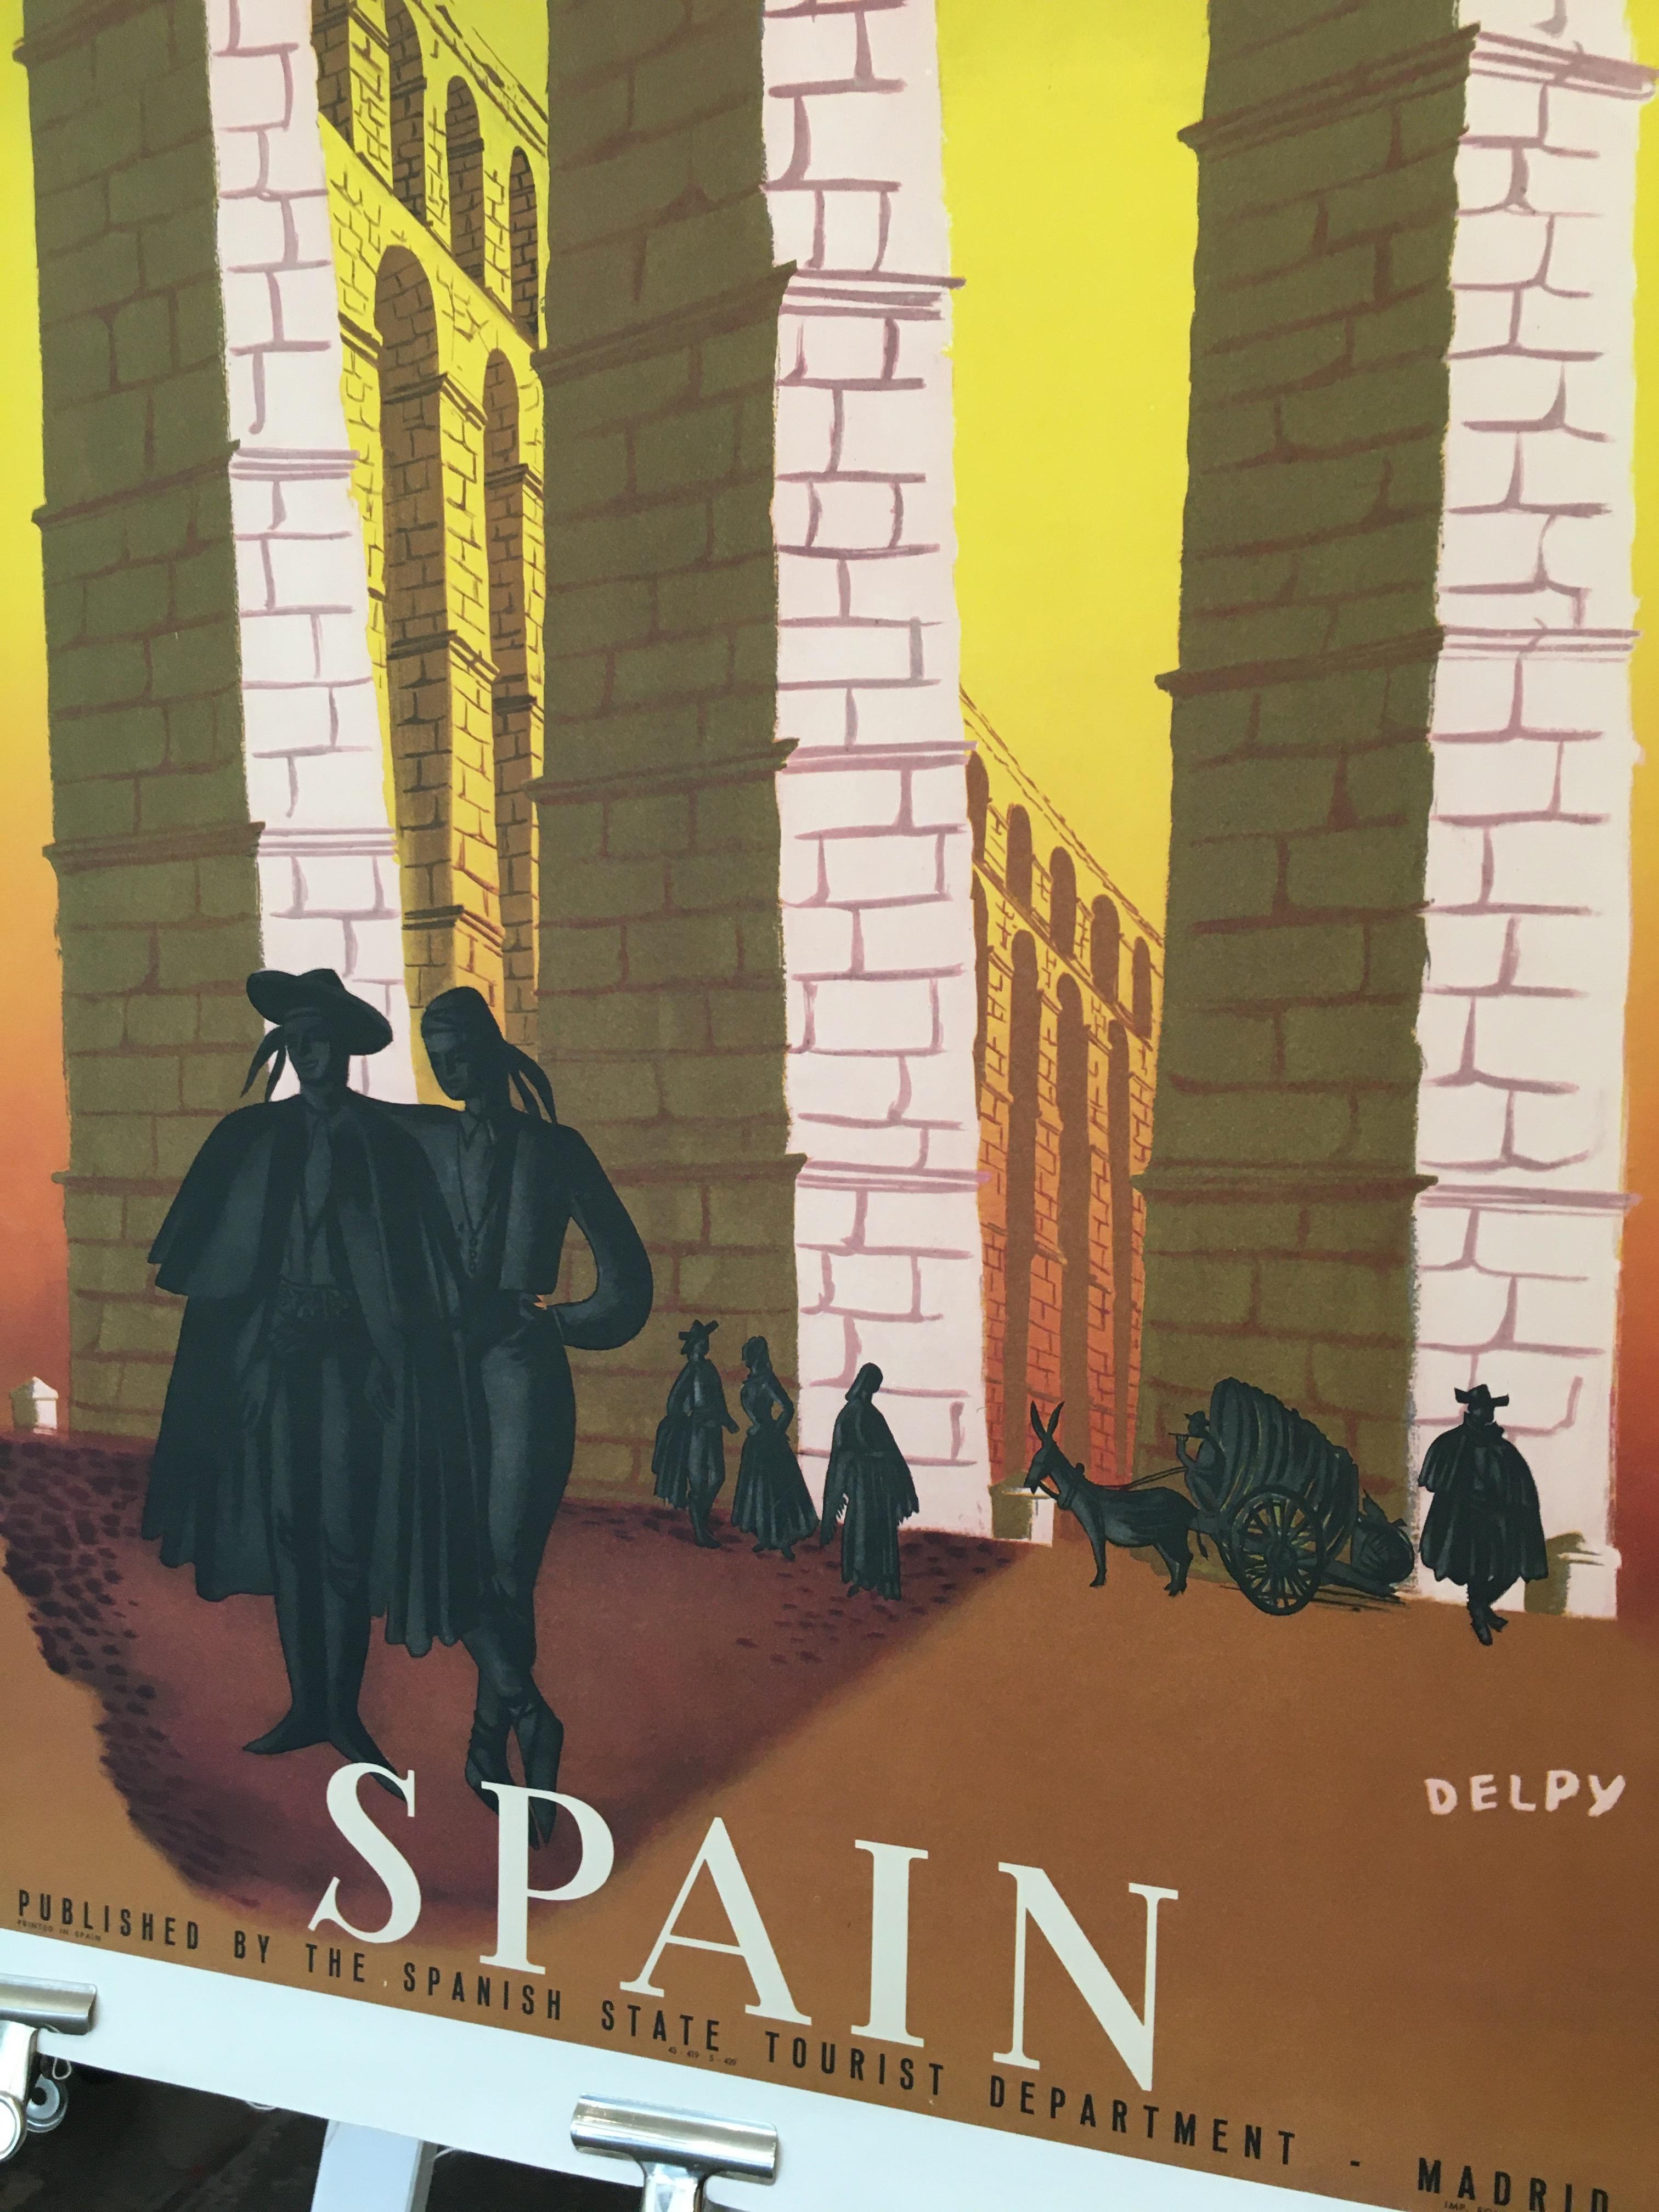 Art Deco 'Spain' Travel and Tourism Original Vintage Poster by Delpy, 1948 For Sale